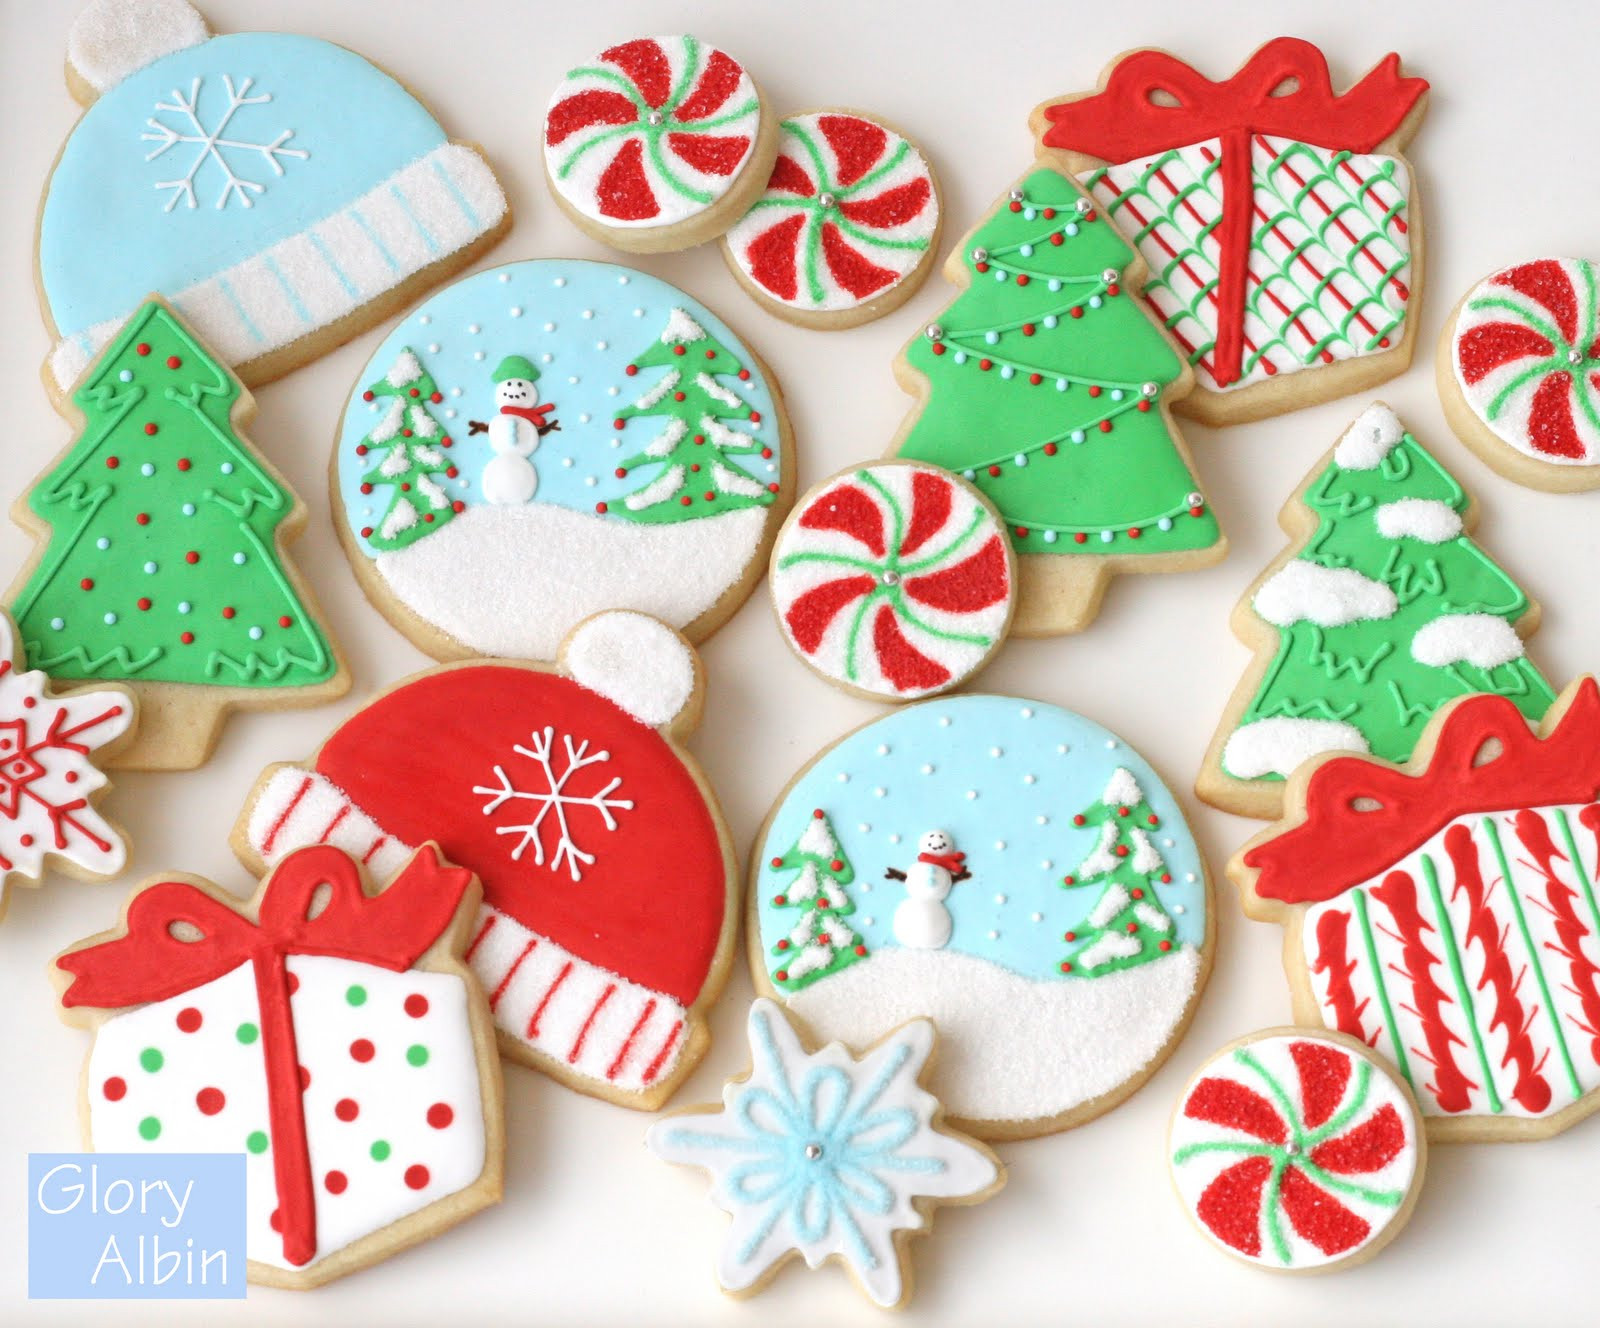 Royal Icing Cookie Recipe
 Decorating Sugar Cookies with Royal Icing – Glorious Treats